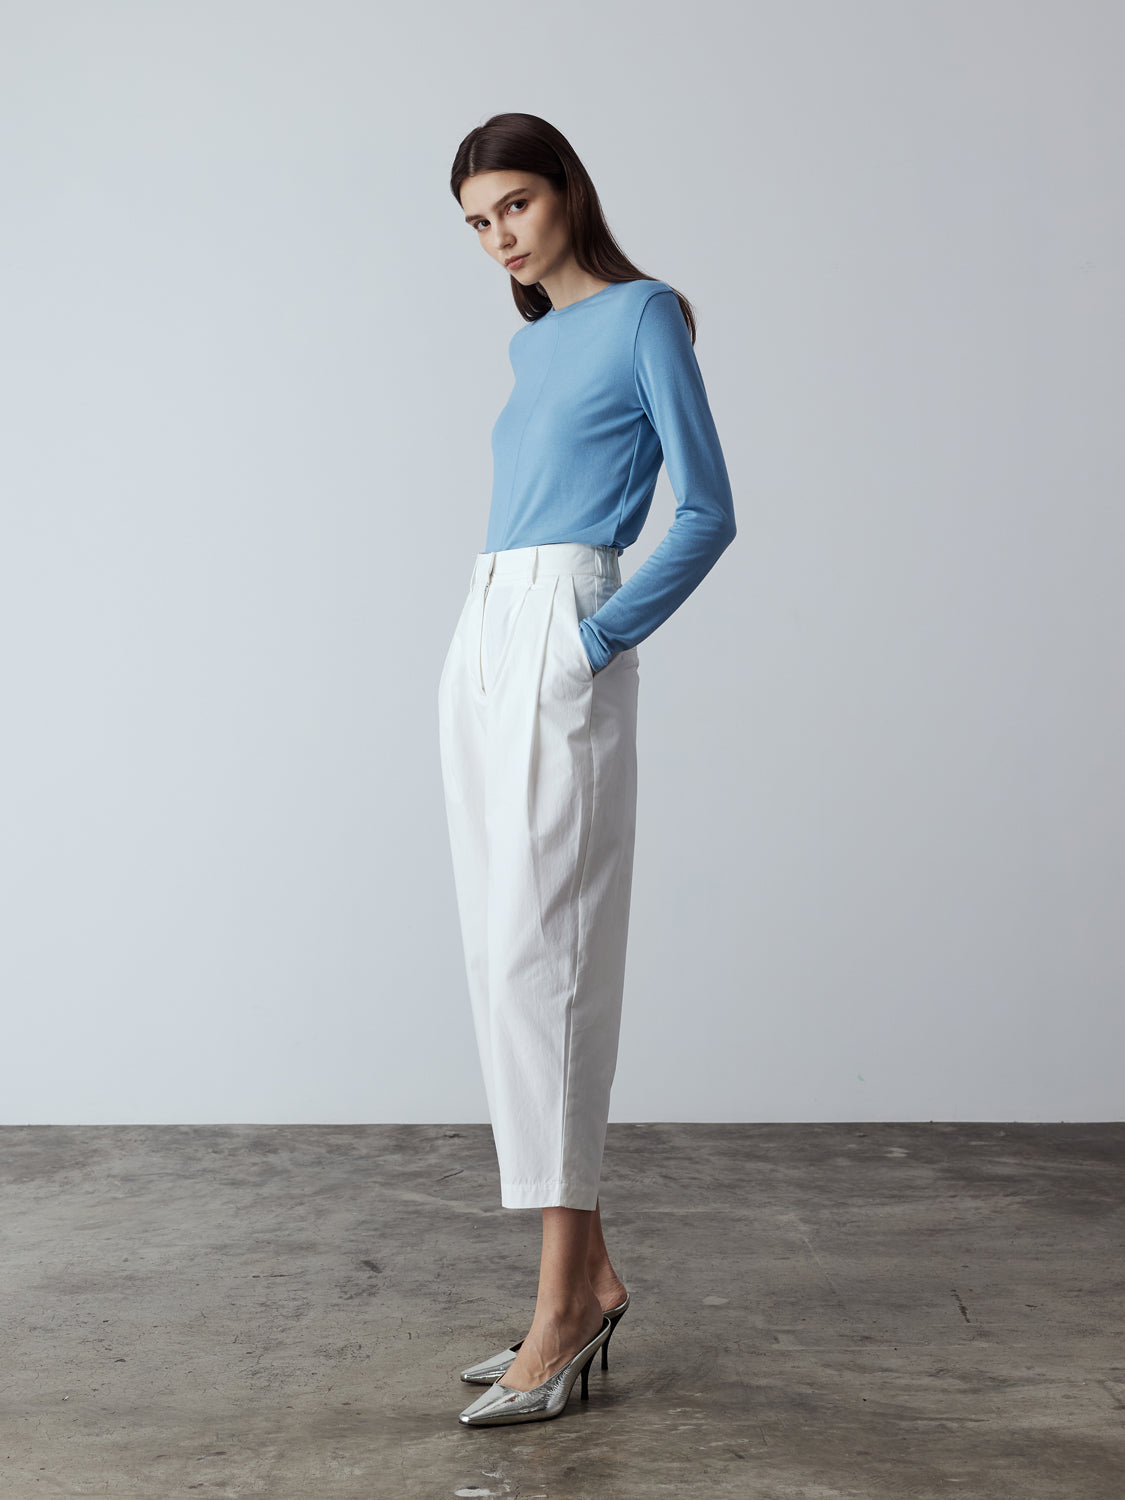 Model is wearing the Cotton Tailored Trousers in White, which comes high-waisted with slash pockets at the sides, a concealed zip-fly closure and pleated details. Worn with the Fitted Long Sleeve T-Shirt in Blue and metallic silver heels.